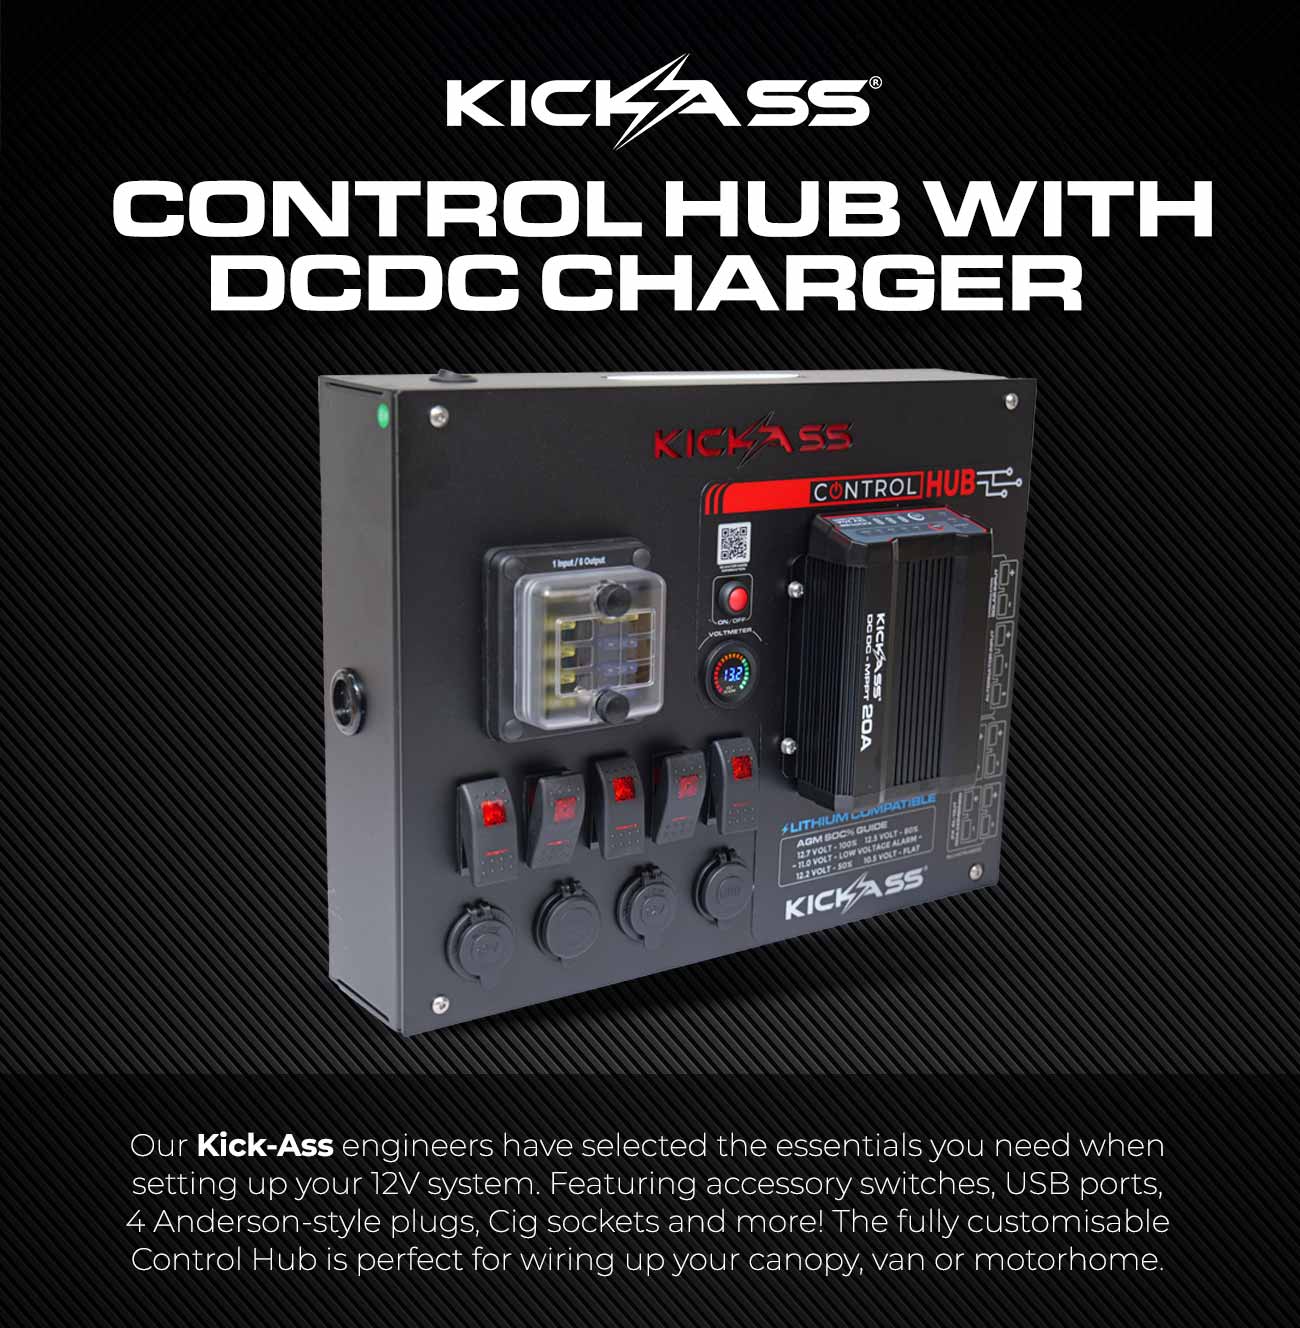 CONTROL HUB WITH DCDC CHARGER